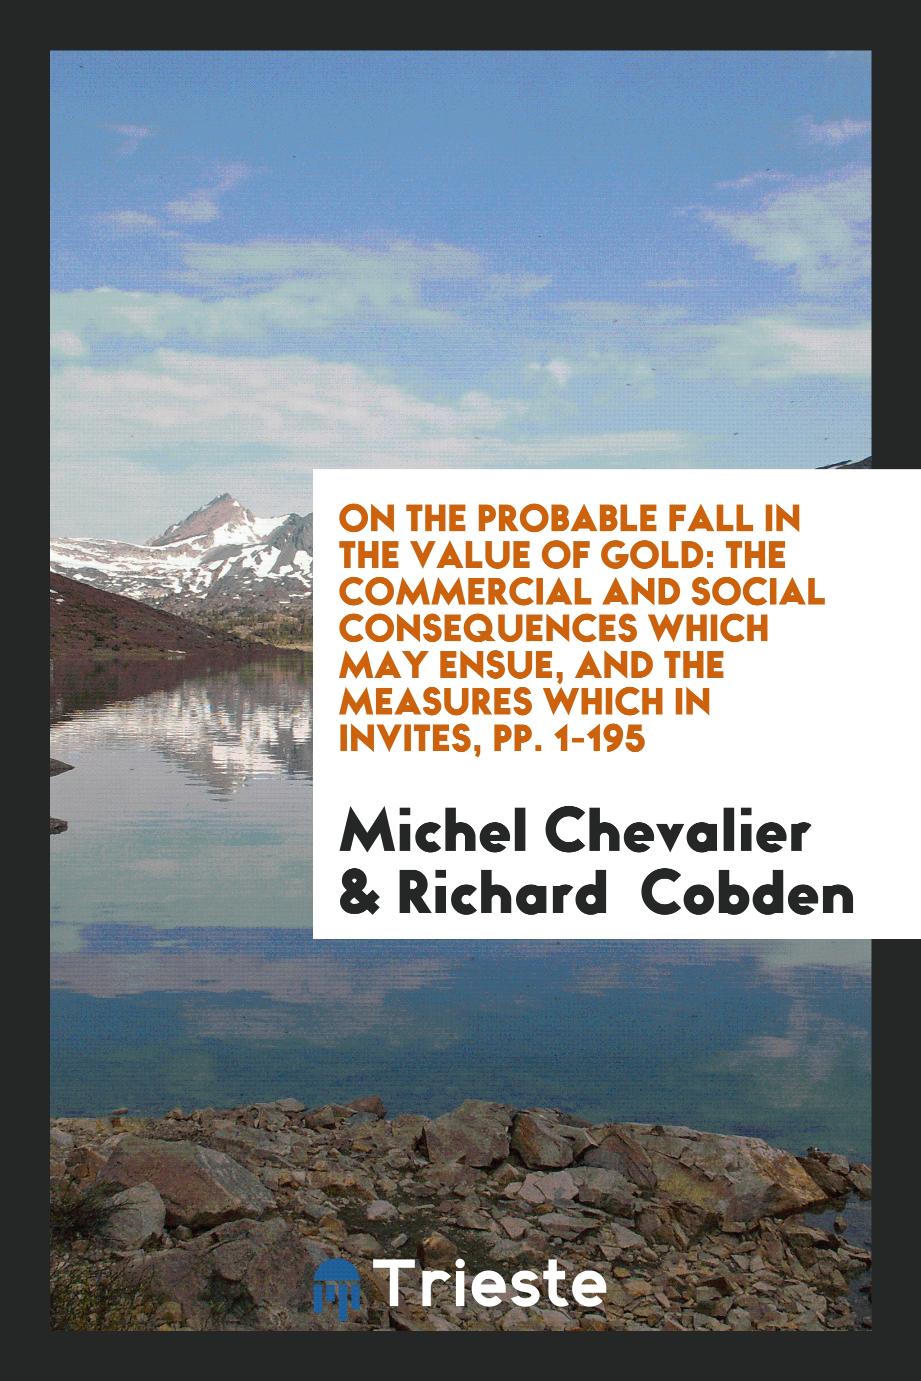 On the Probable Fall in the Value of Gold: The Commercial and Social Consequences Which May Ensue, and the Measures Which in Invites, pp. 1-195